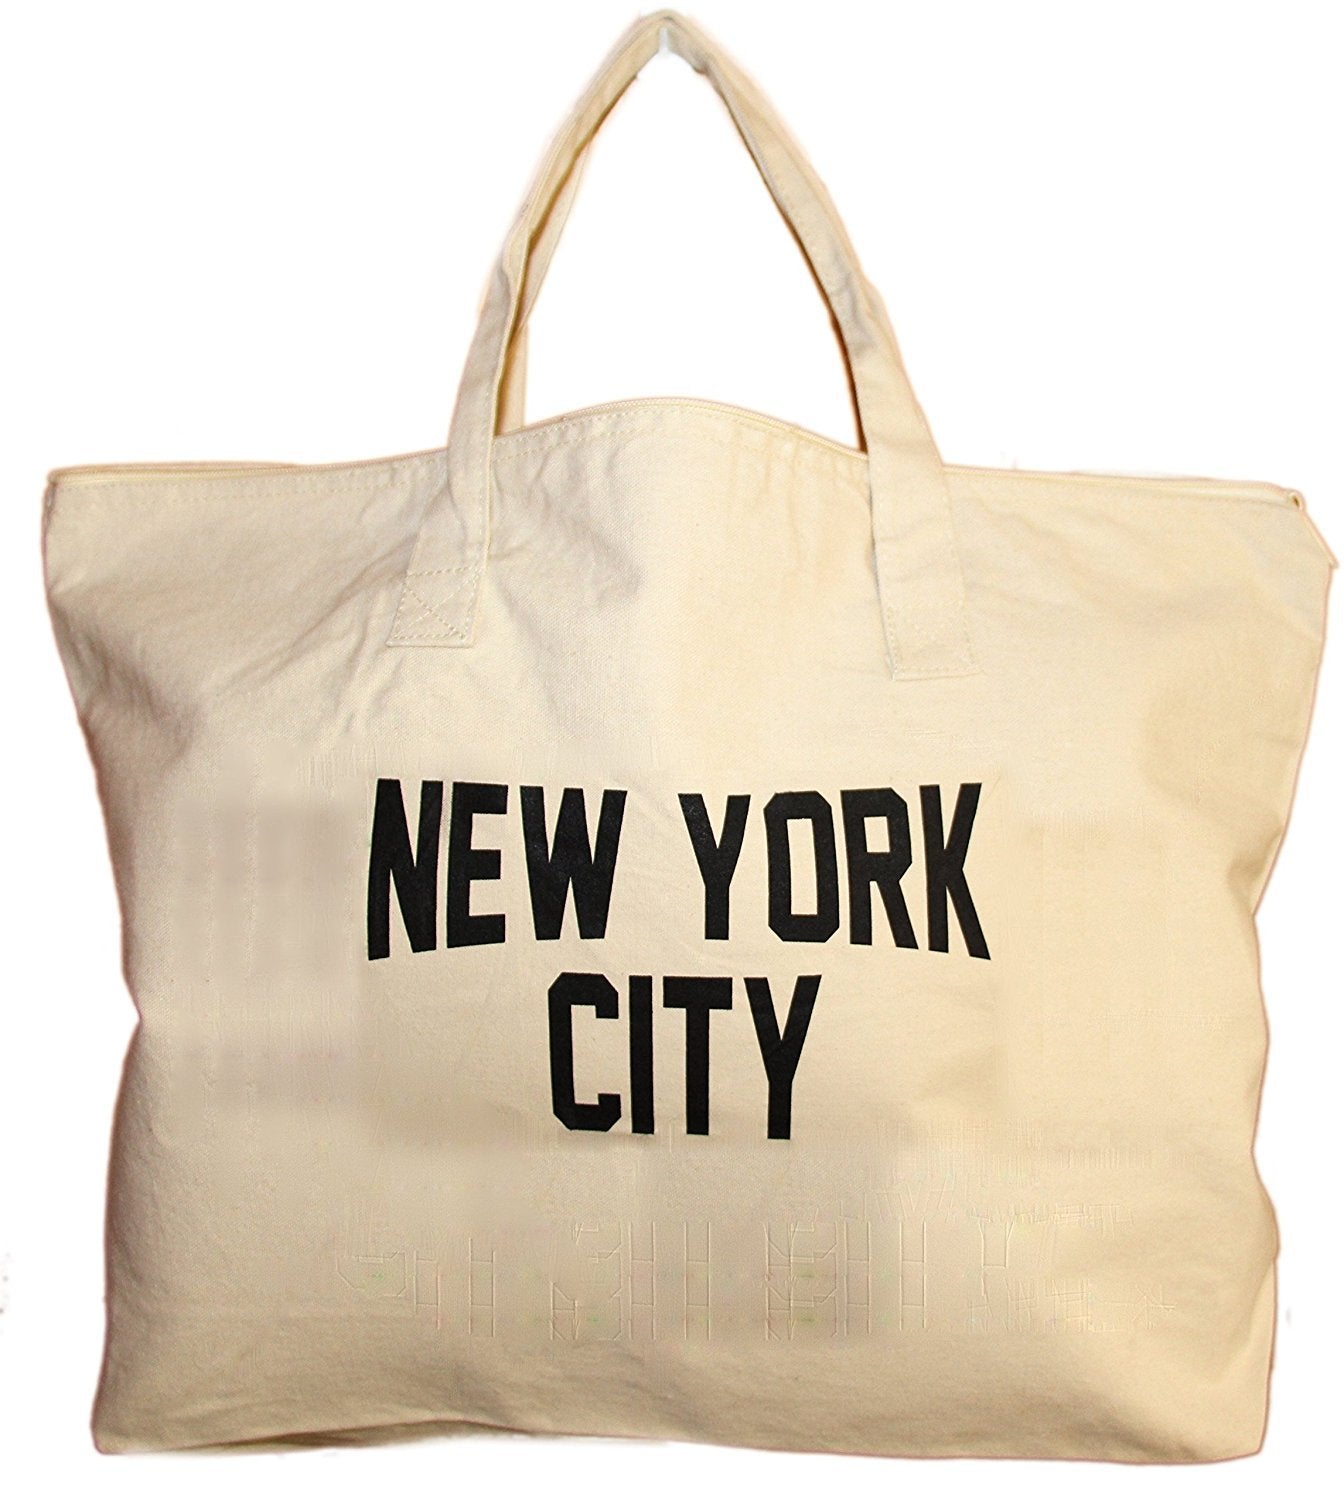 NYC Zippered Tote Bag 100% Cotton Canvas New York City Beach Shopping Gym